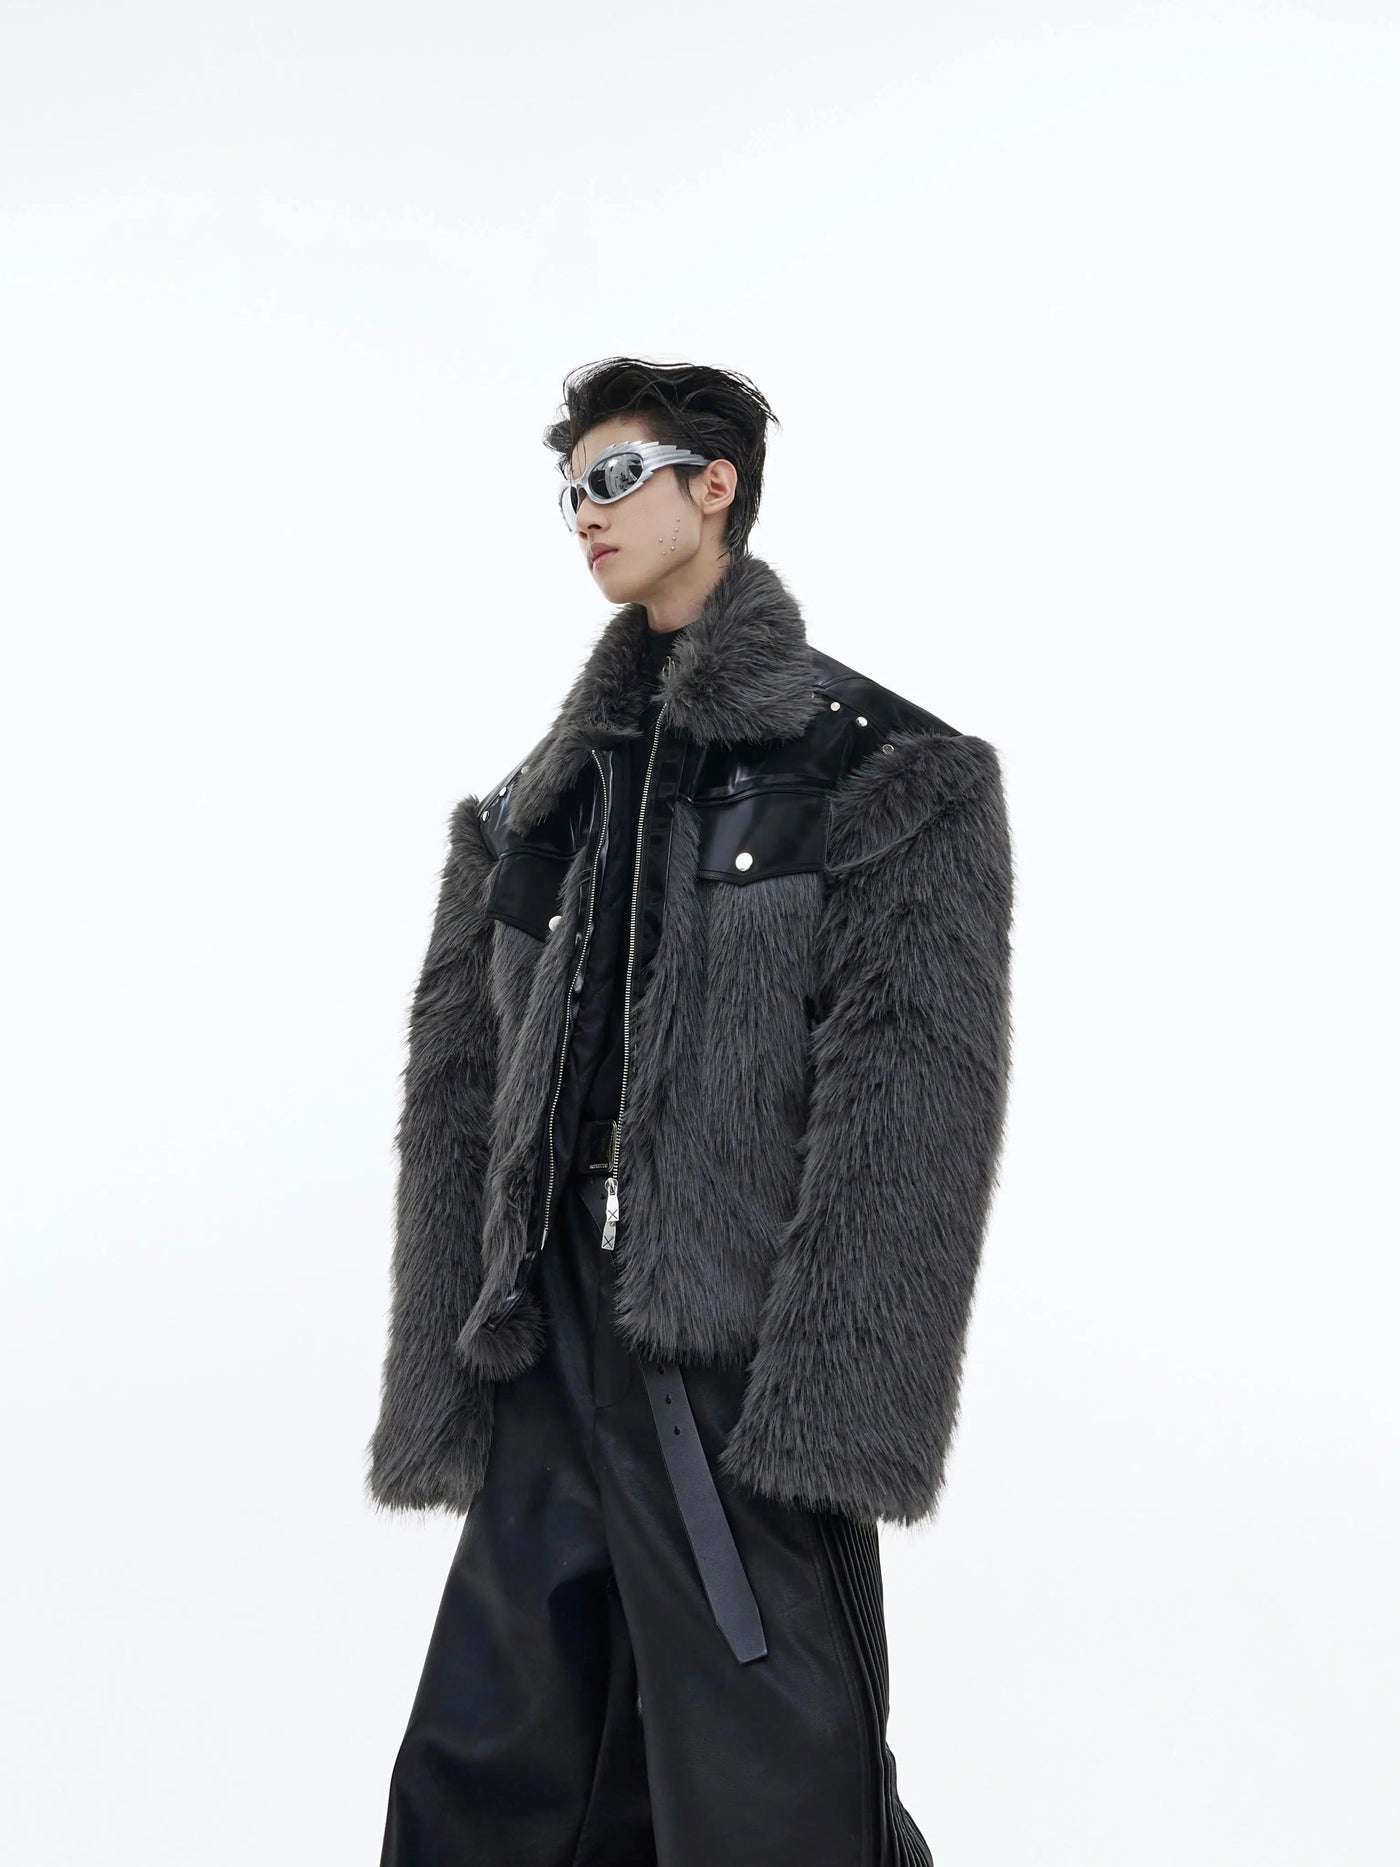 Fur and Leather Splice Jacket Korean Street Fashion Jacket By Argue Culture Shop Online at OH Vault